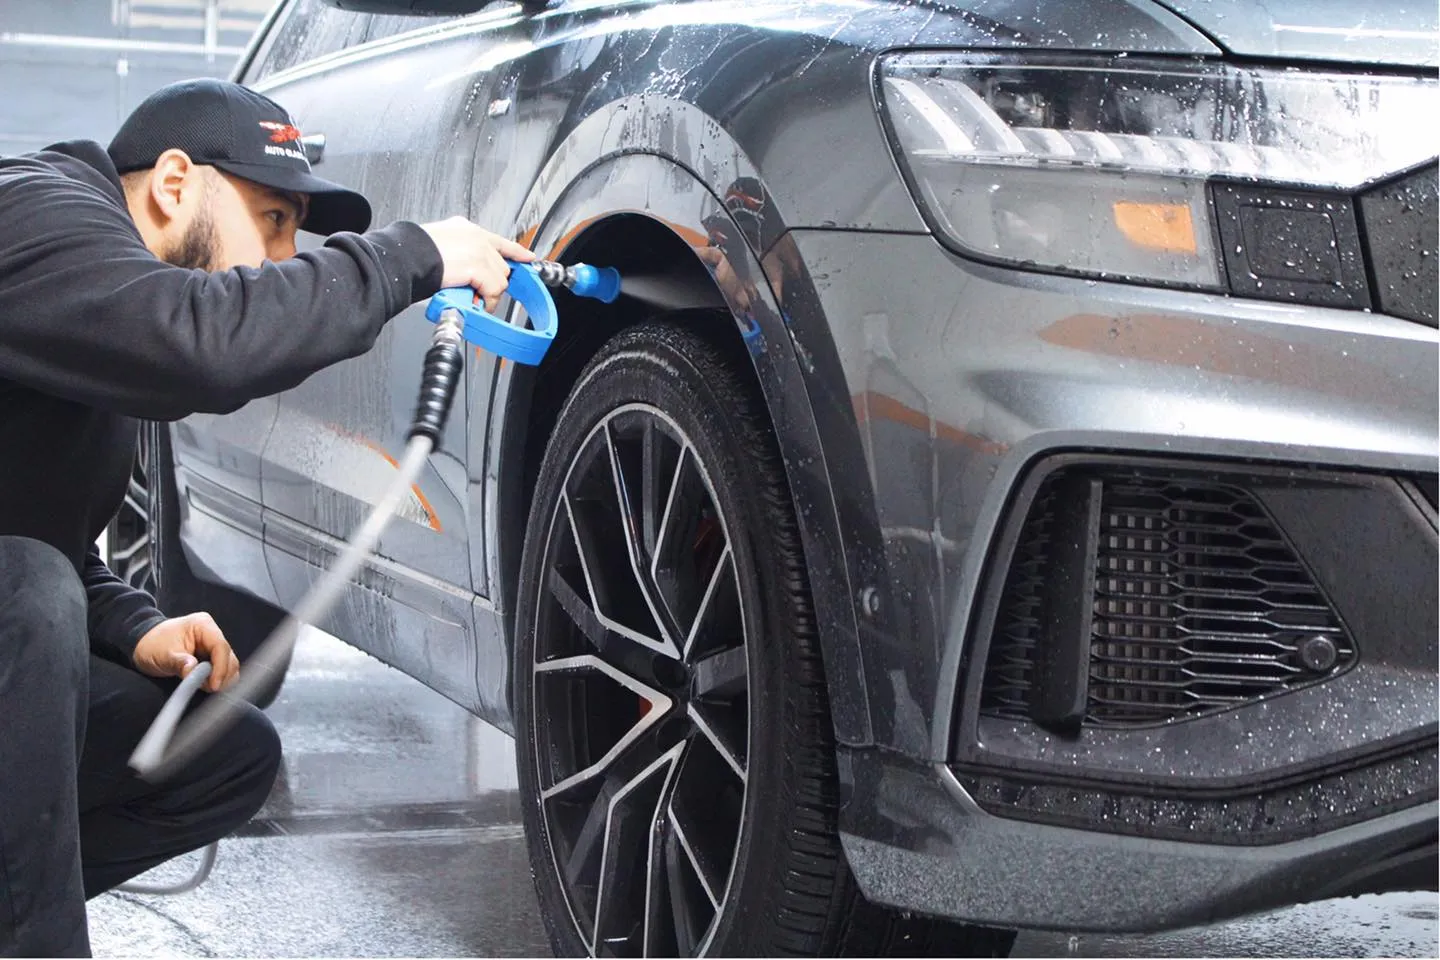 How To Choose The Best Car Detailing Service